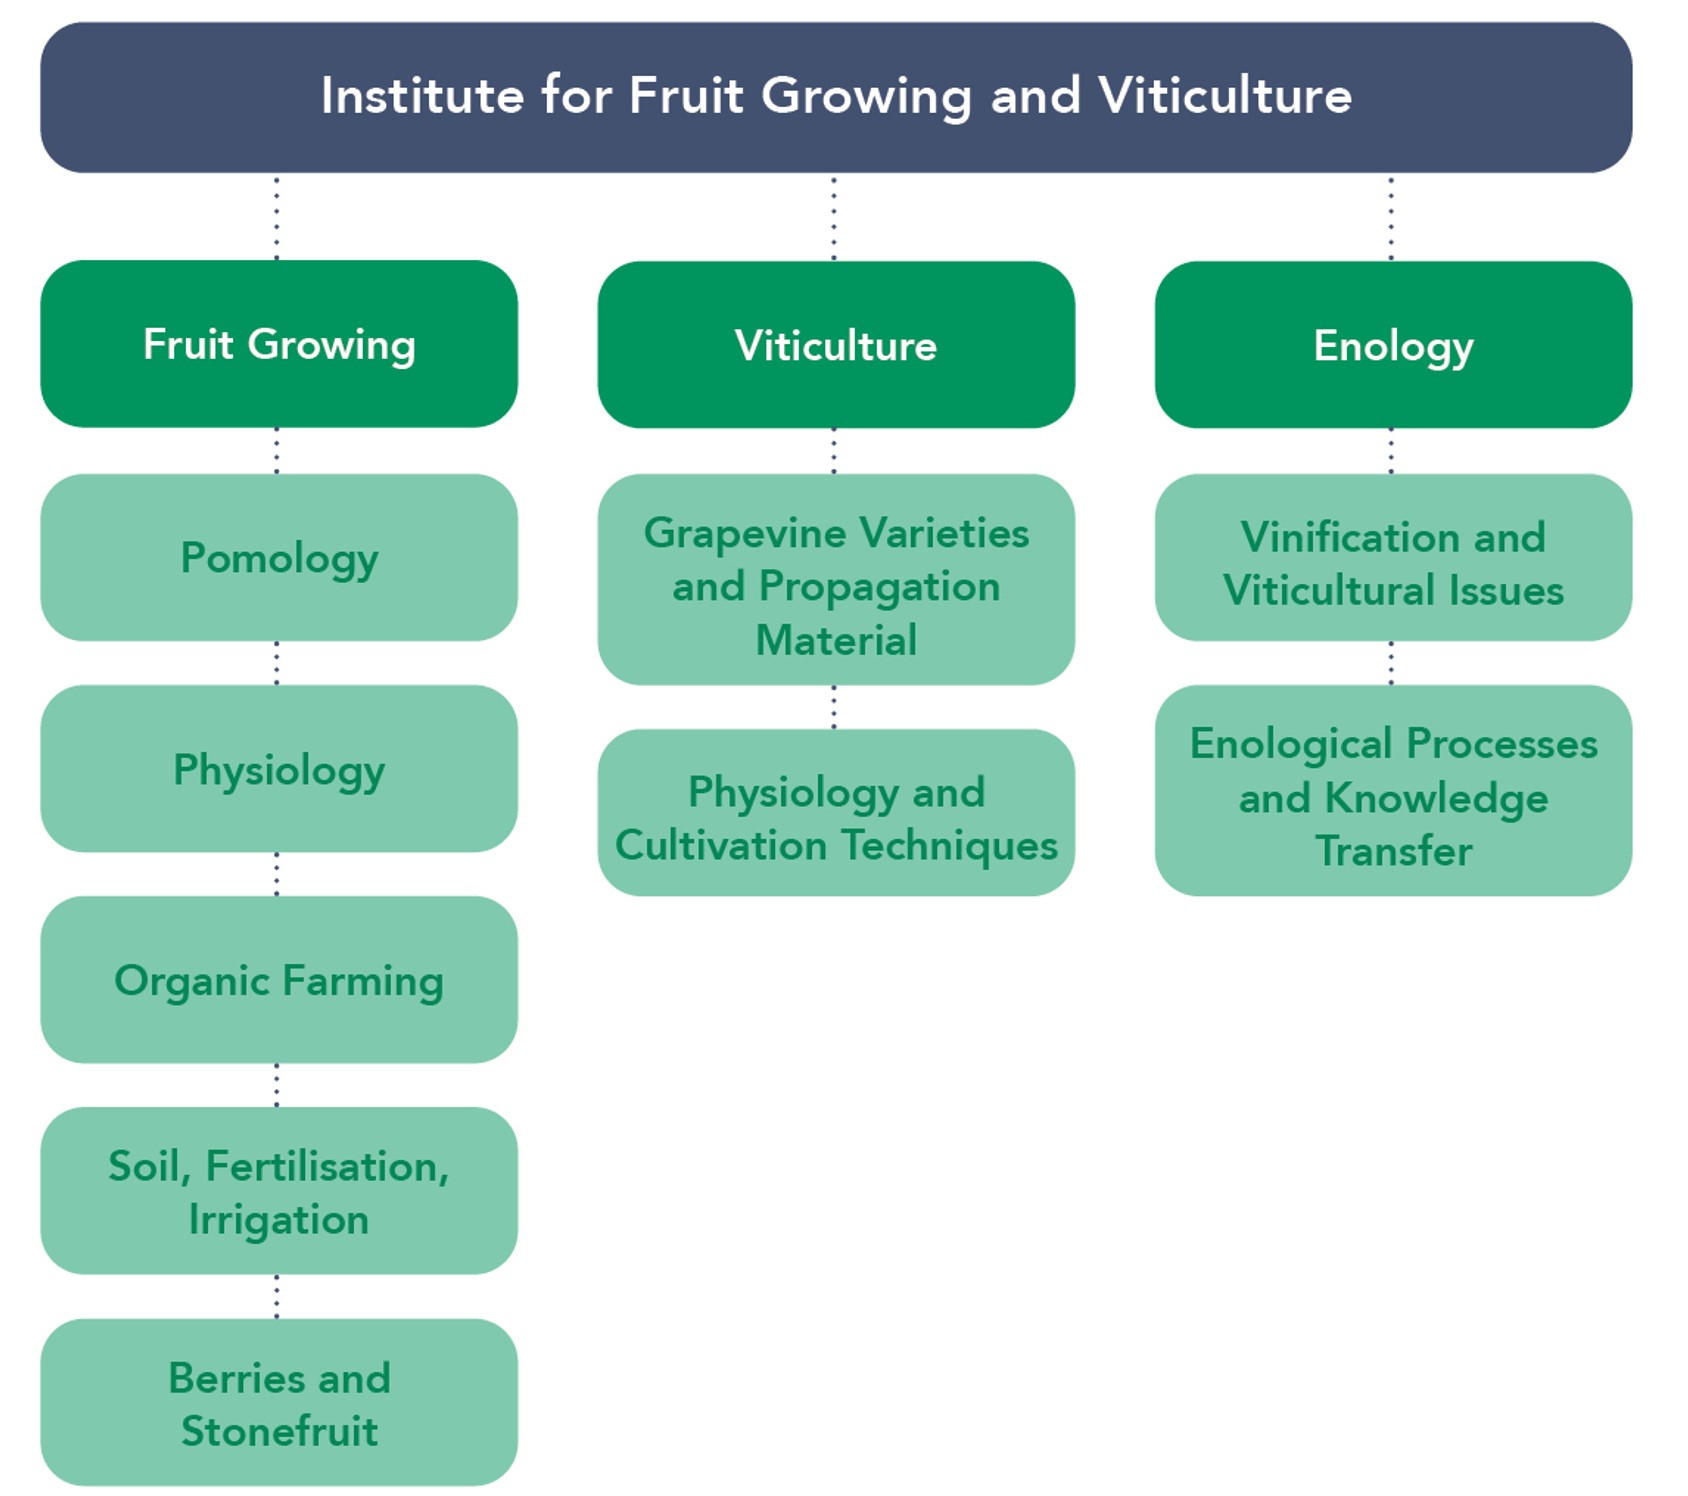 Organization Chart Institute for Fruit Growing and Viticulture 2023